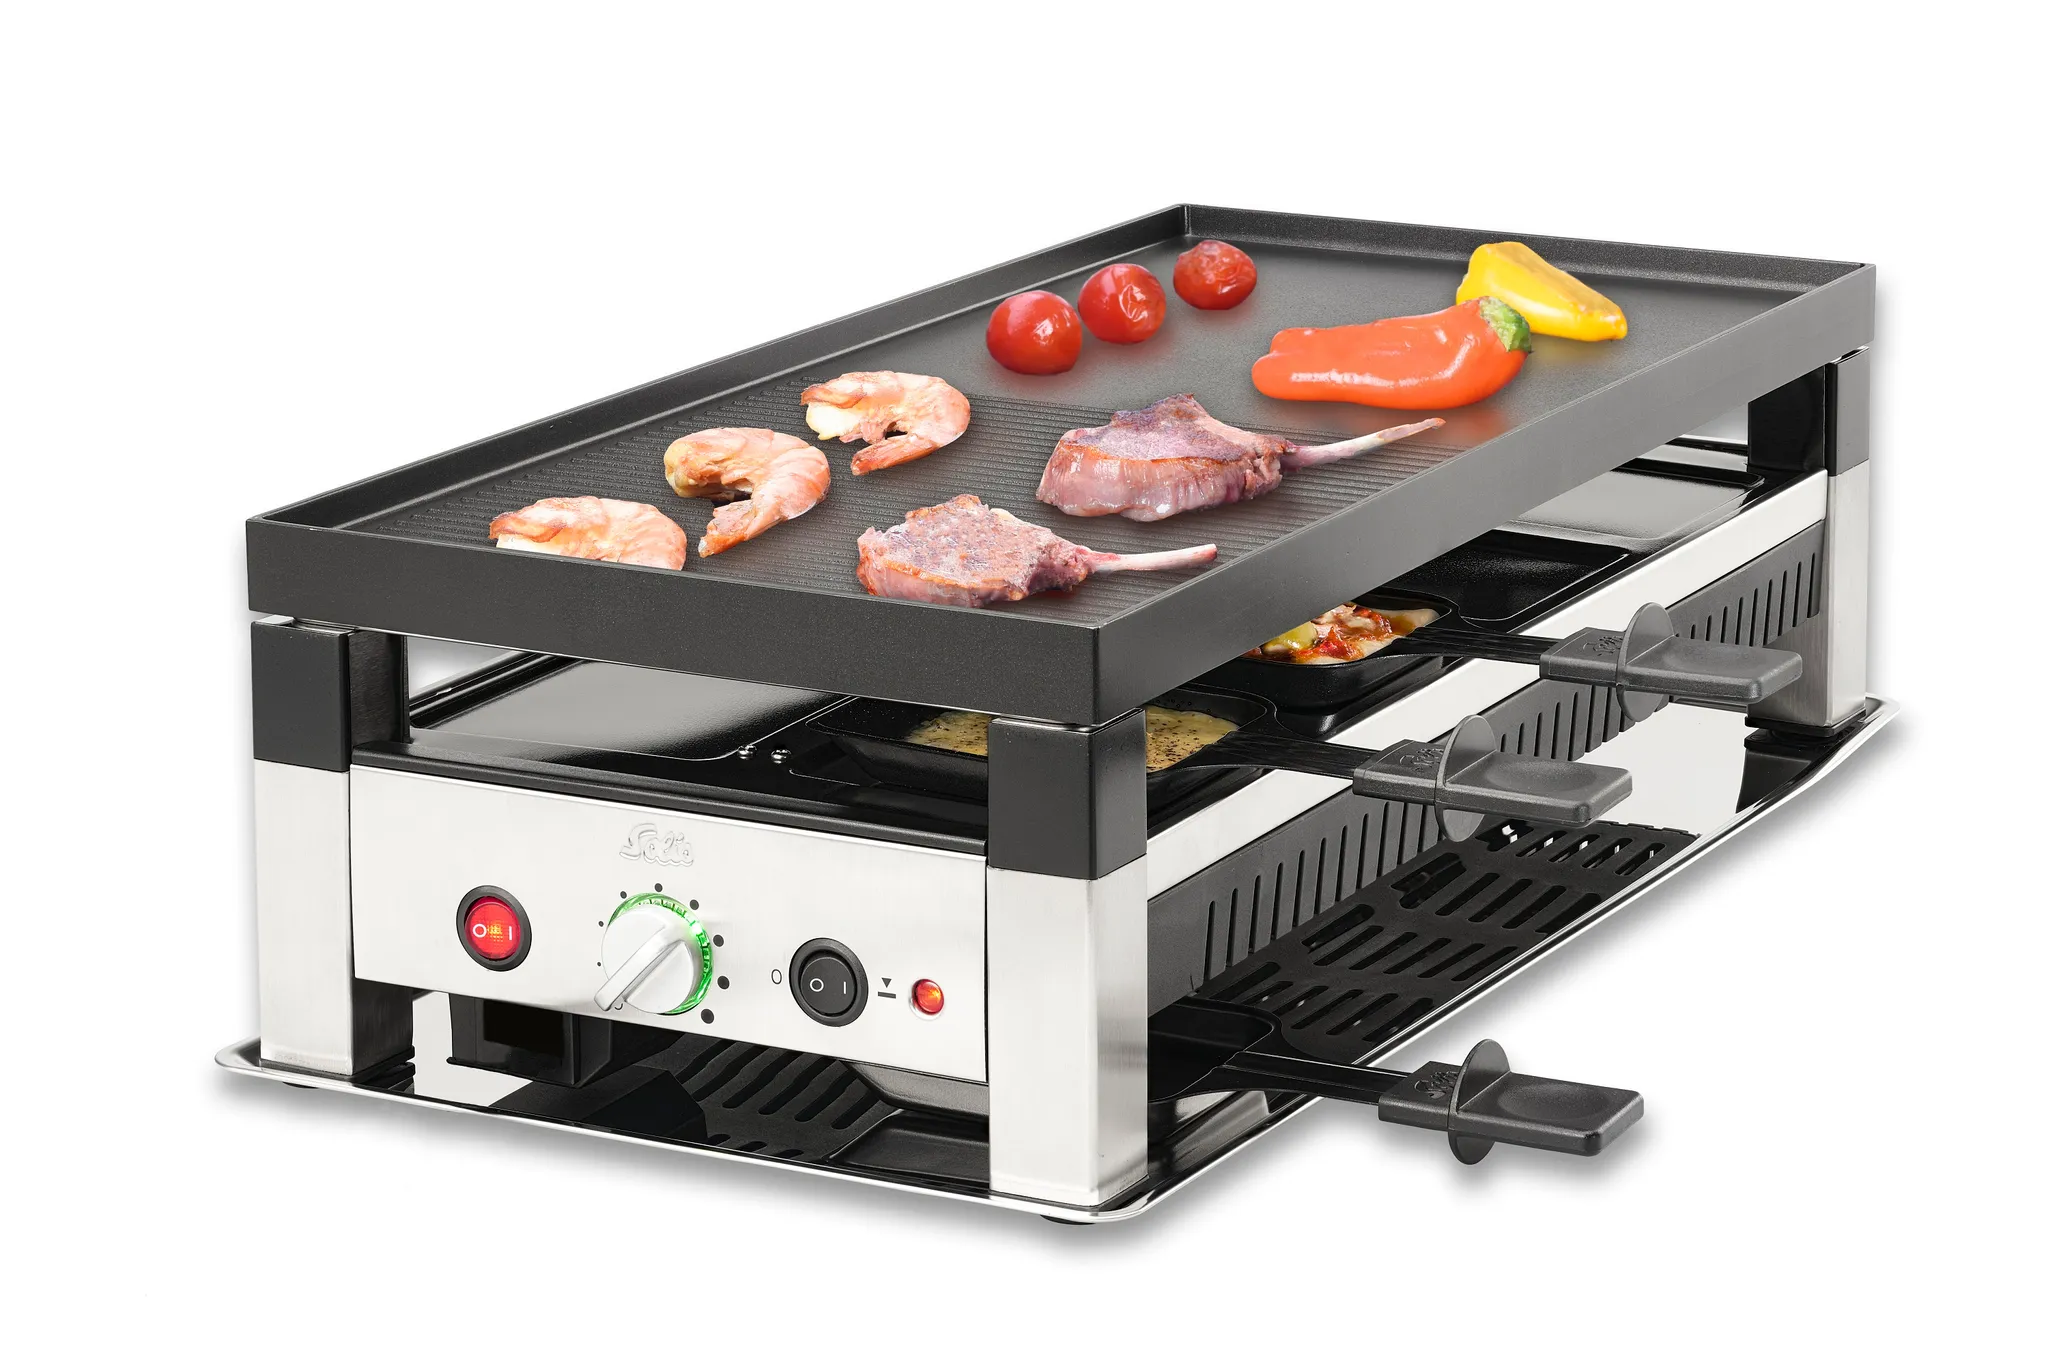 1 Grill Raclette 5 791 Solis Grill in Table